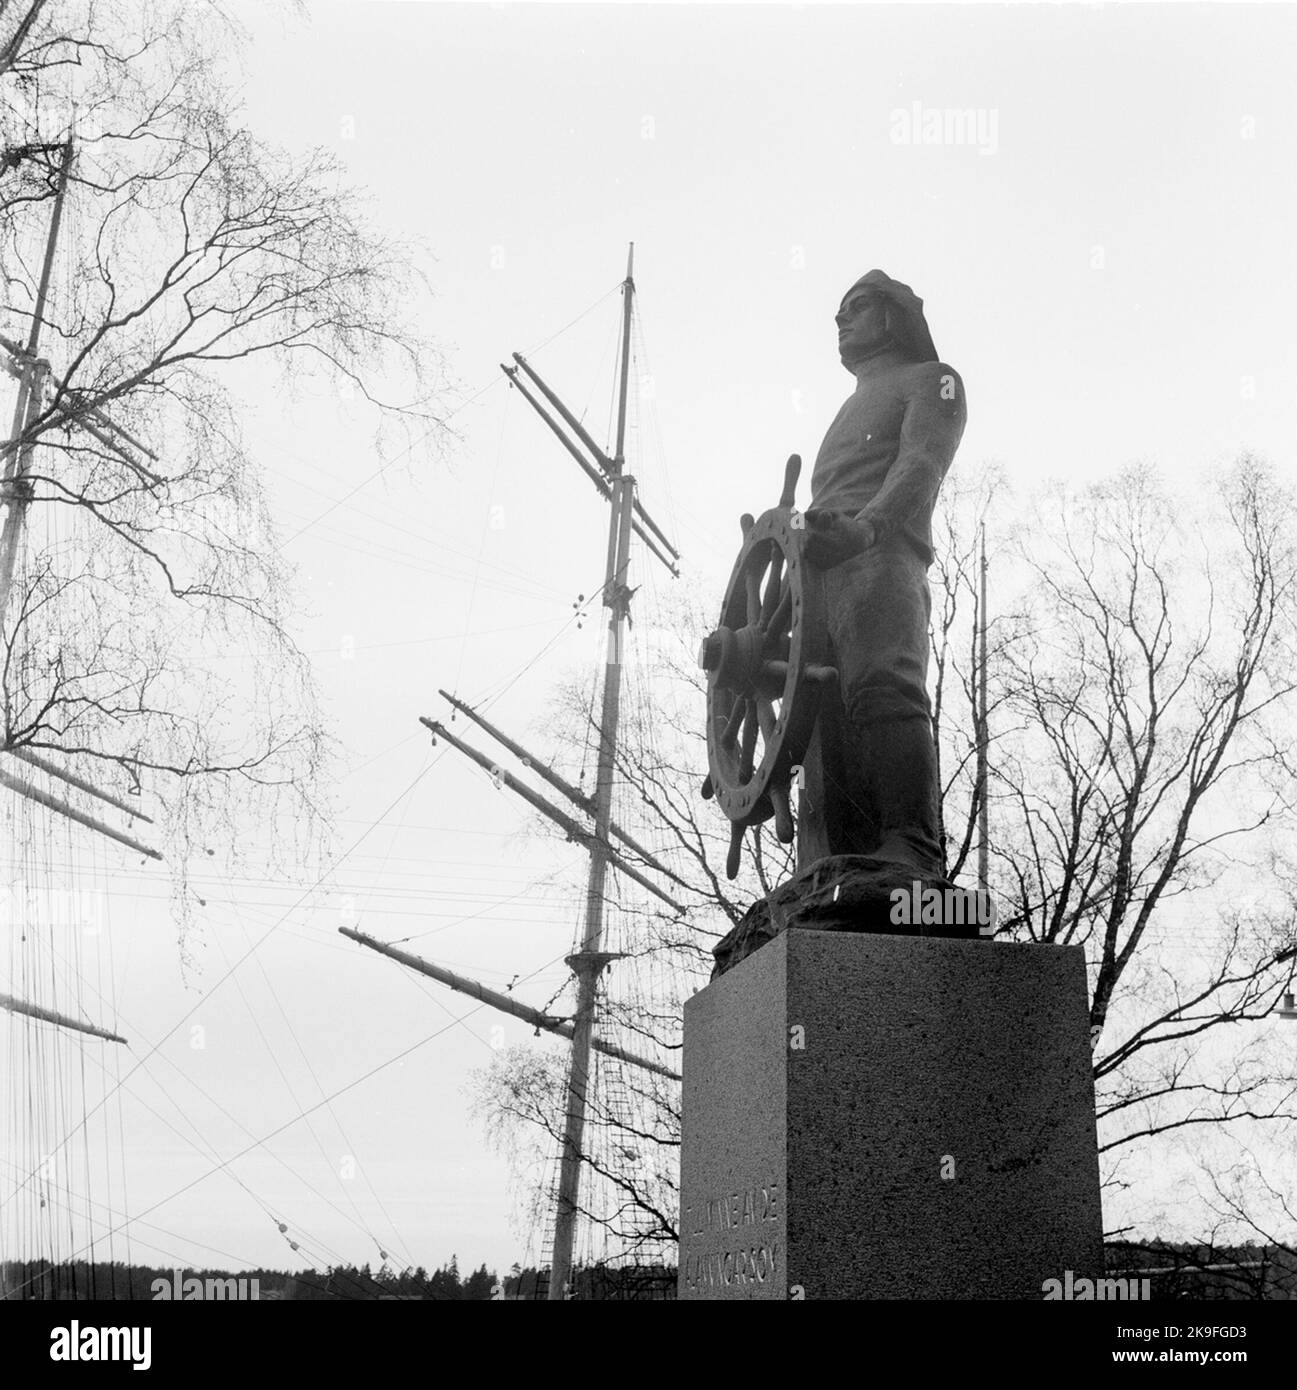 Åland trip. Statue by the seaman at rudder. The mast of Pomerania, the world's only four -masted freight sail ship, now museum ship. Stock Photo